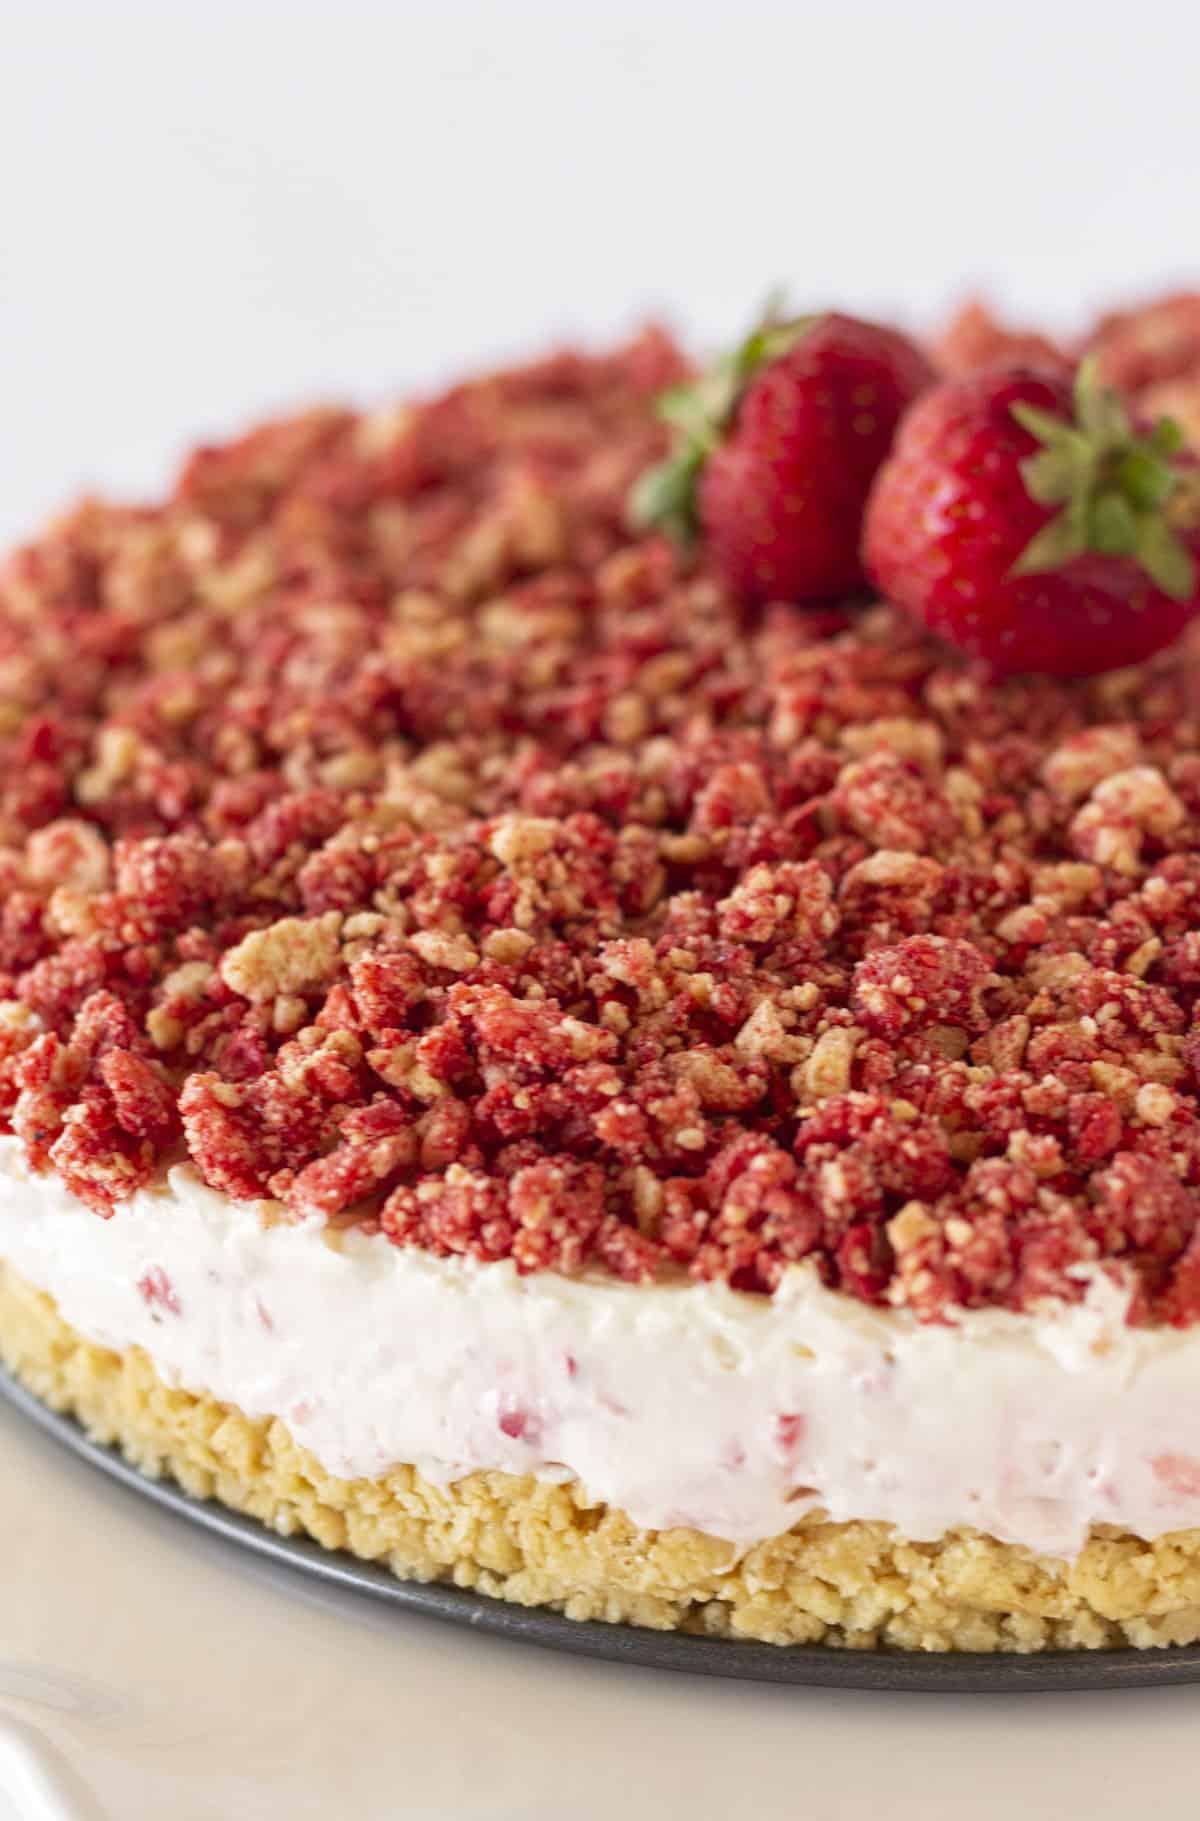 A whole strawberry crunch cheesecake with fresh strawberries on top.